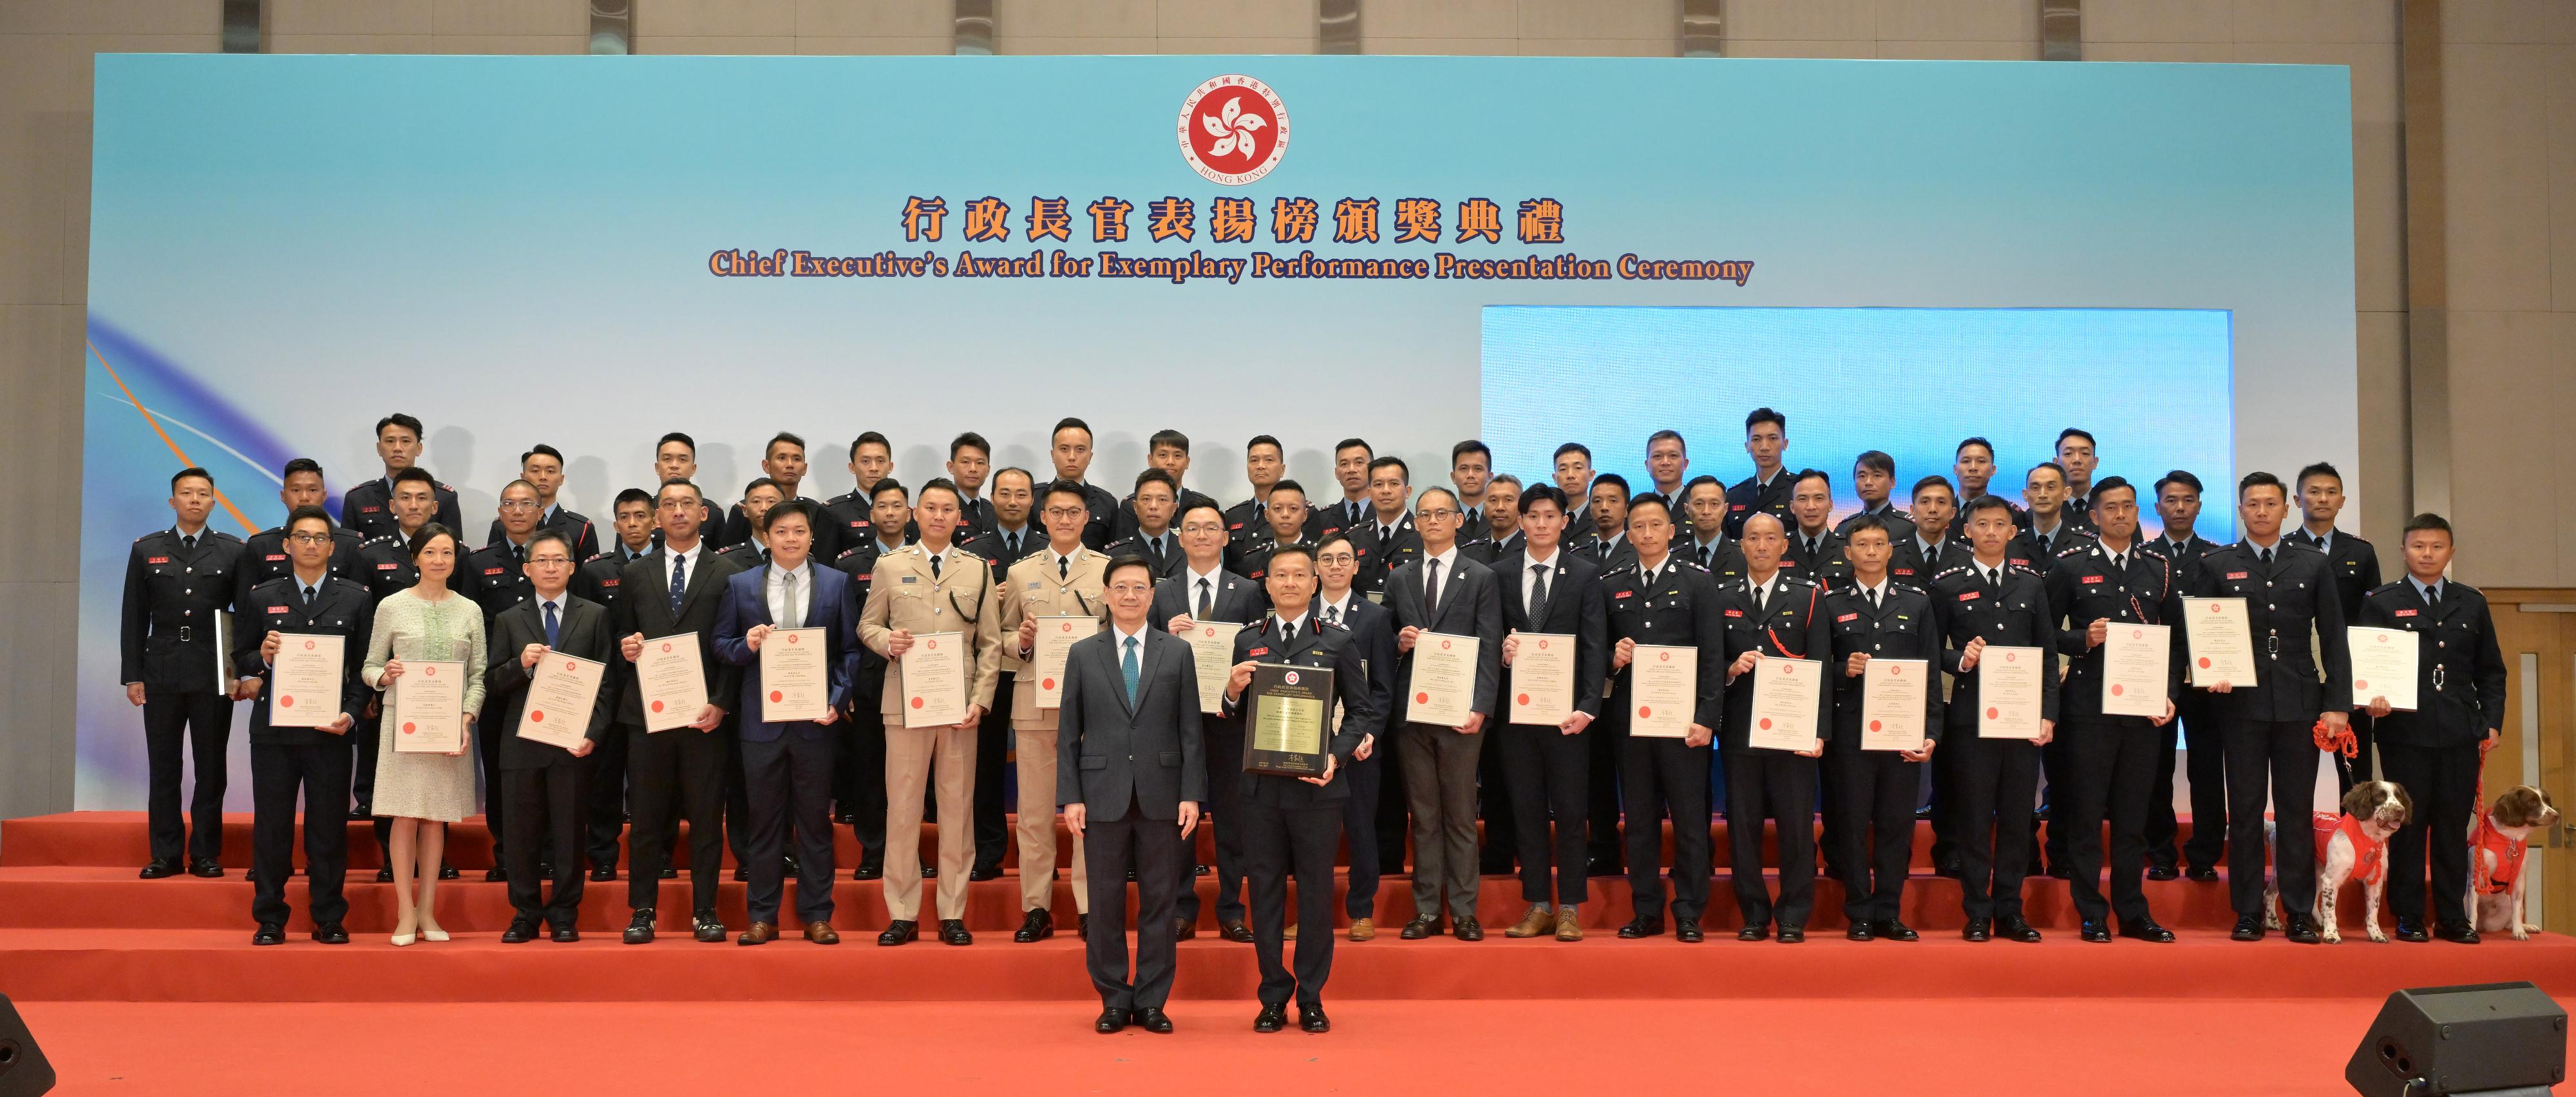 The Chief Executive, Mr John Lee, attended the Chief Executive's Award for Exemplary Performance Presentation Ceremony today (July 13). Photo shows Mr Lee (front row, left) with awarded members and rescue dogs of the Hong Kong Special Administrative Region search and rescue team deployed to quake-stricken areas of Türkiye in 2023 at the ceremony.